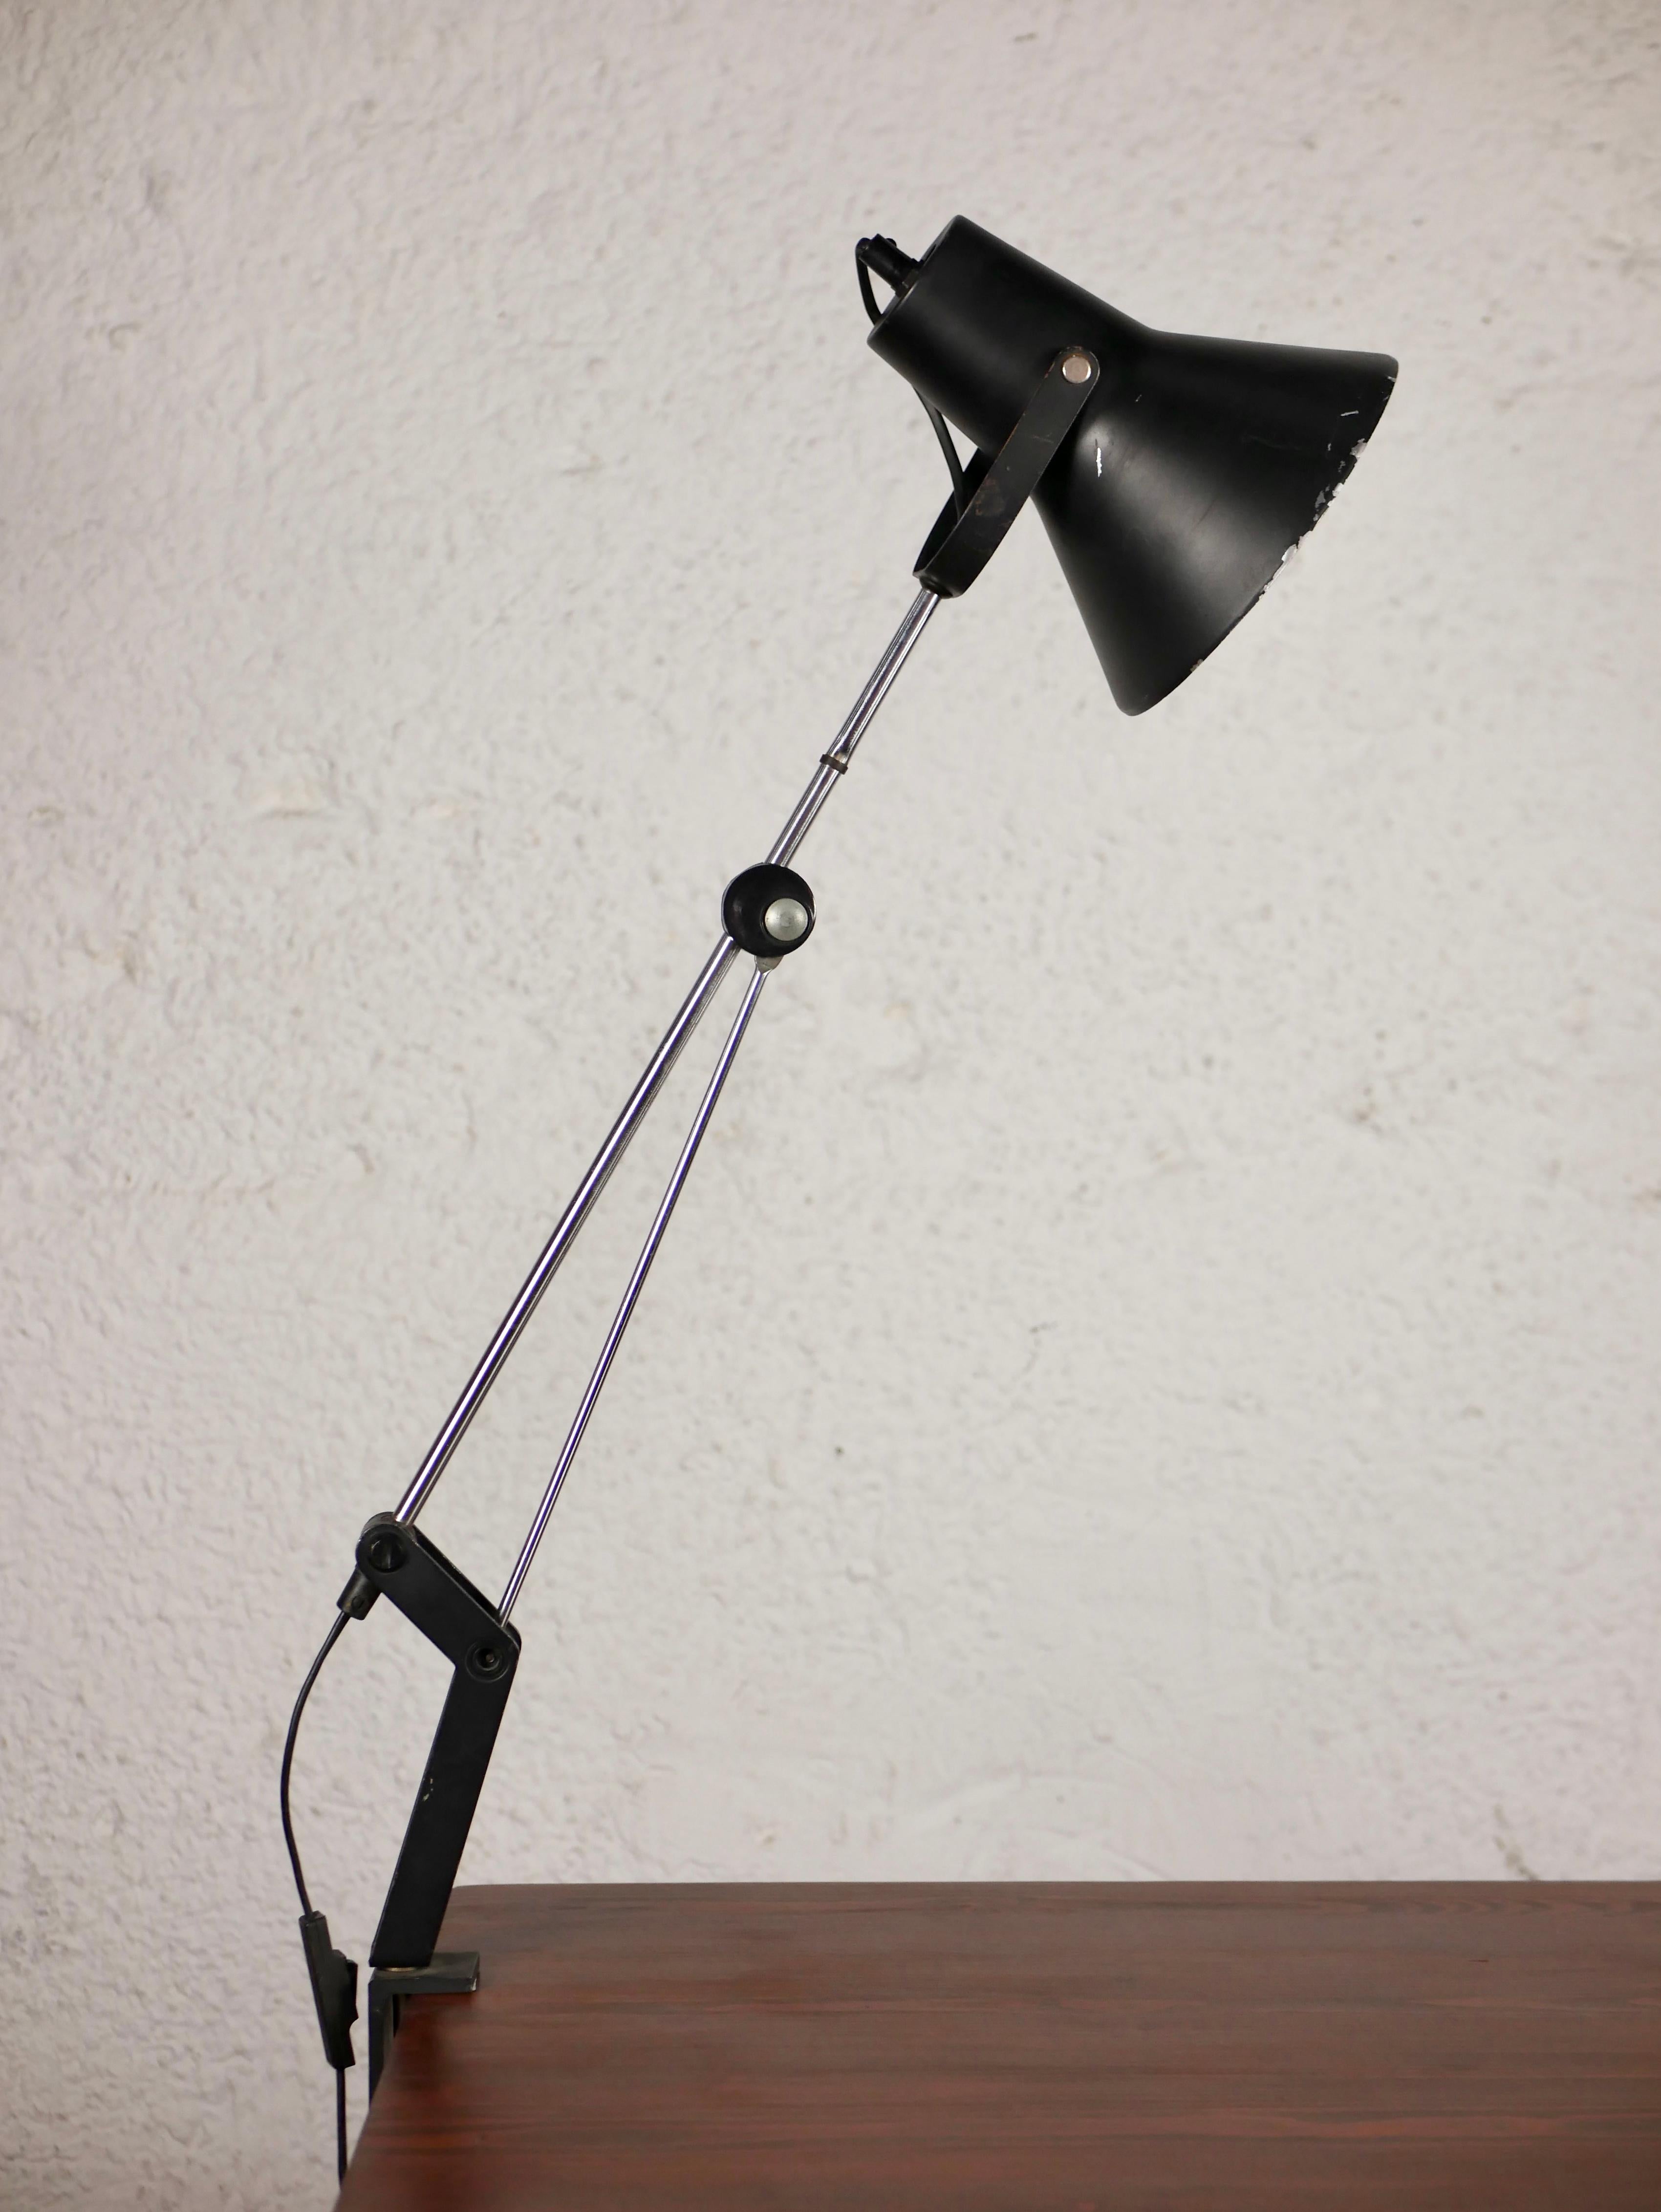 Beautiful and kind of human desk lamp by Ikea, made in the 1980s, with a vice to fix it. Model 1063.
A unique design, with a playful leg, adjustable thanks to the central thumbwheel.
Good condition, scratches on the reflector.
Dimensions : around